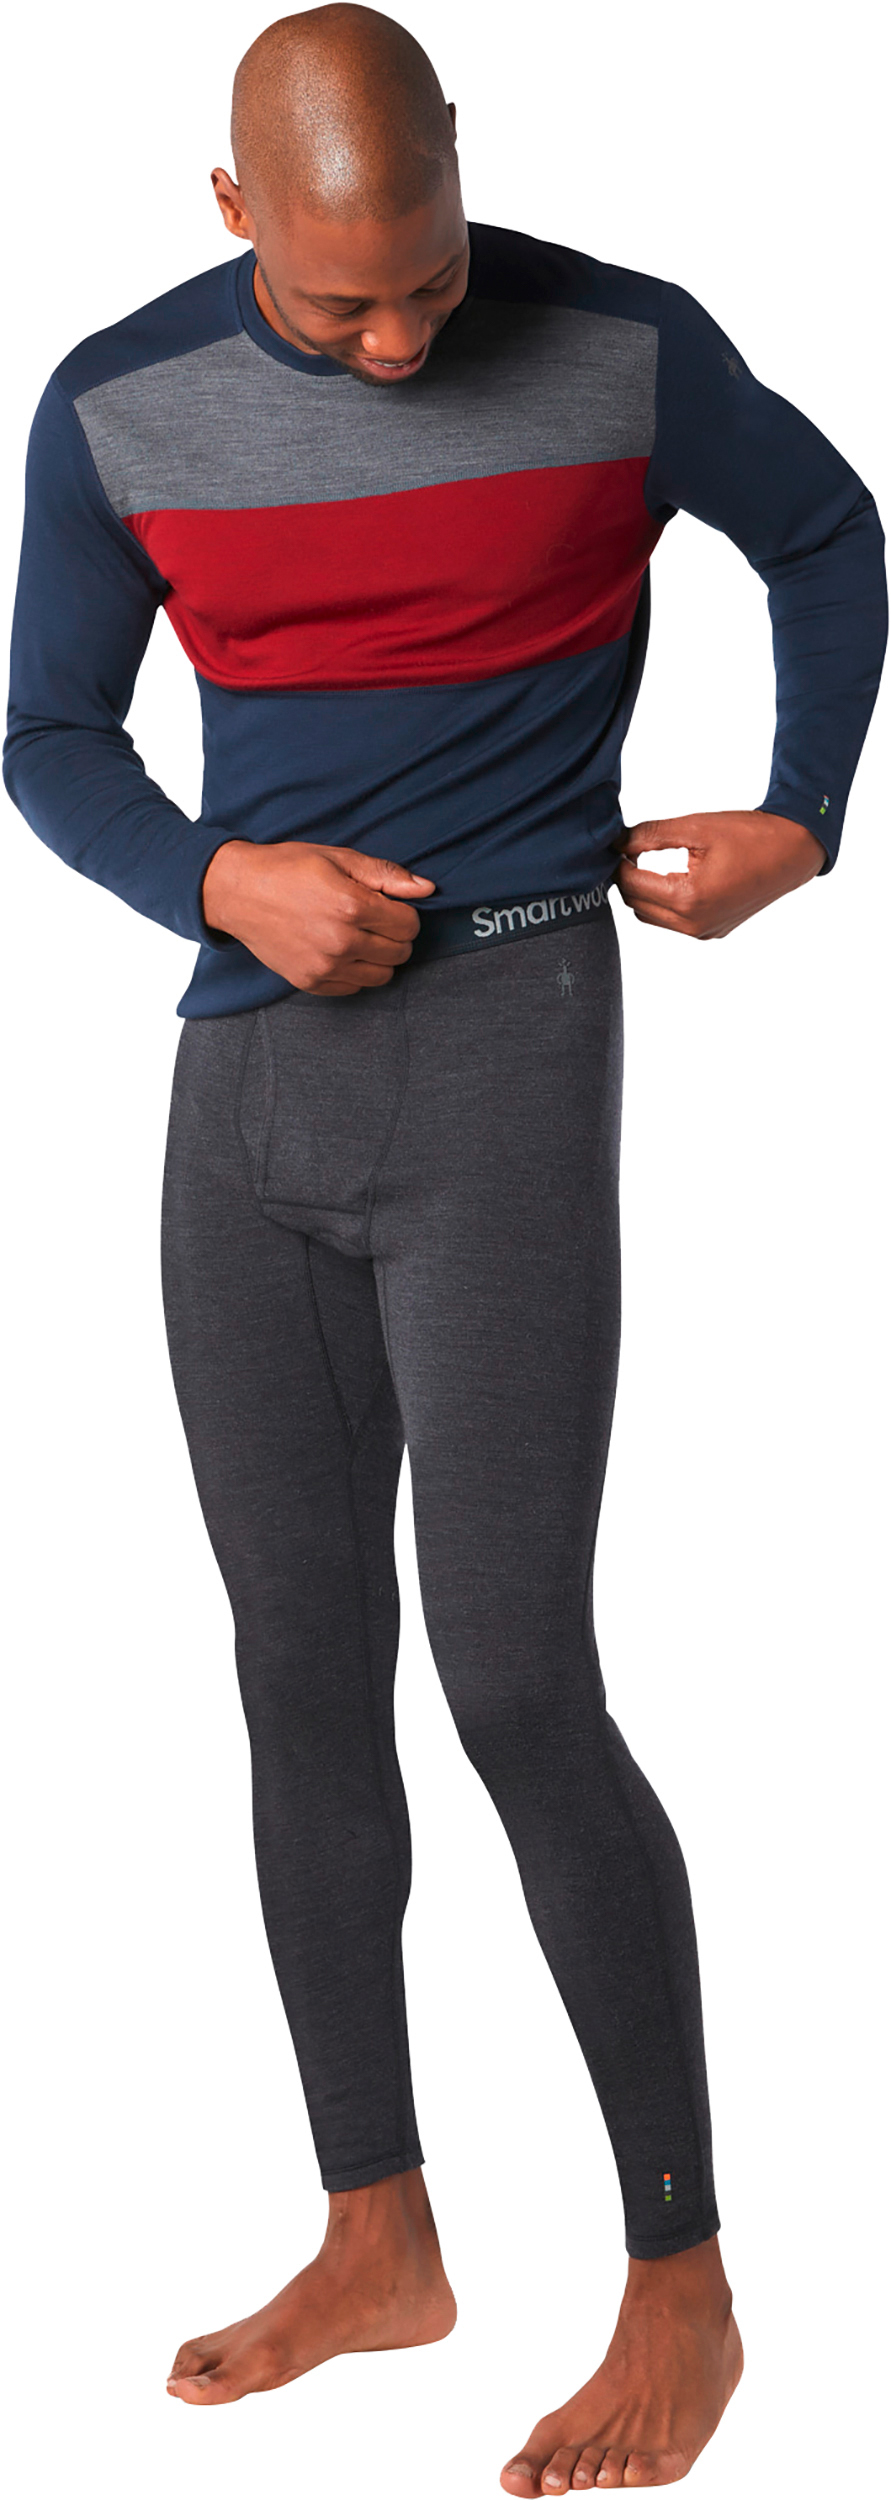 Smartwool Classic Thermal Merino 250 Base Layer Bottoms - Mens, FREE  SHIPPING in Canada